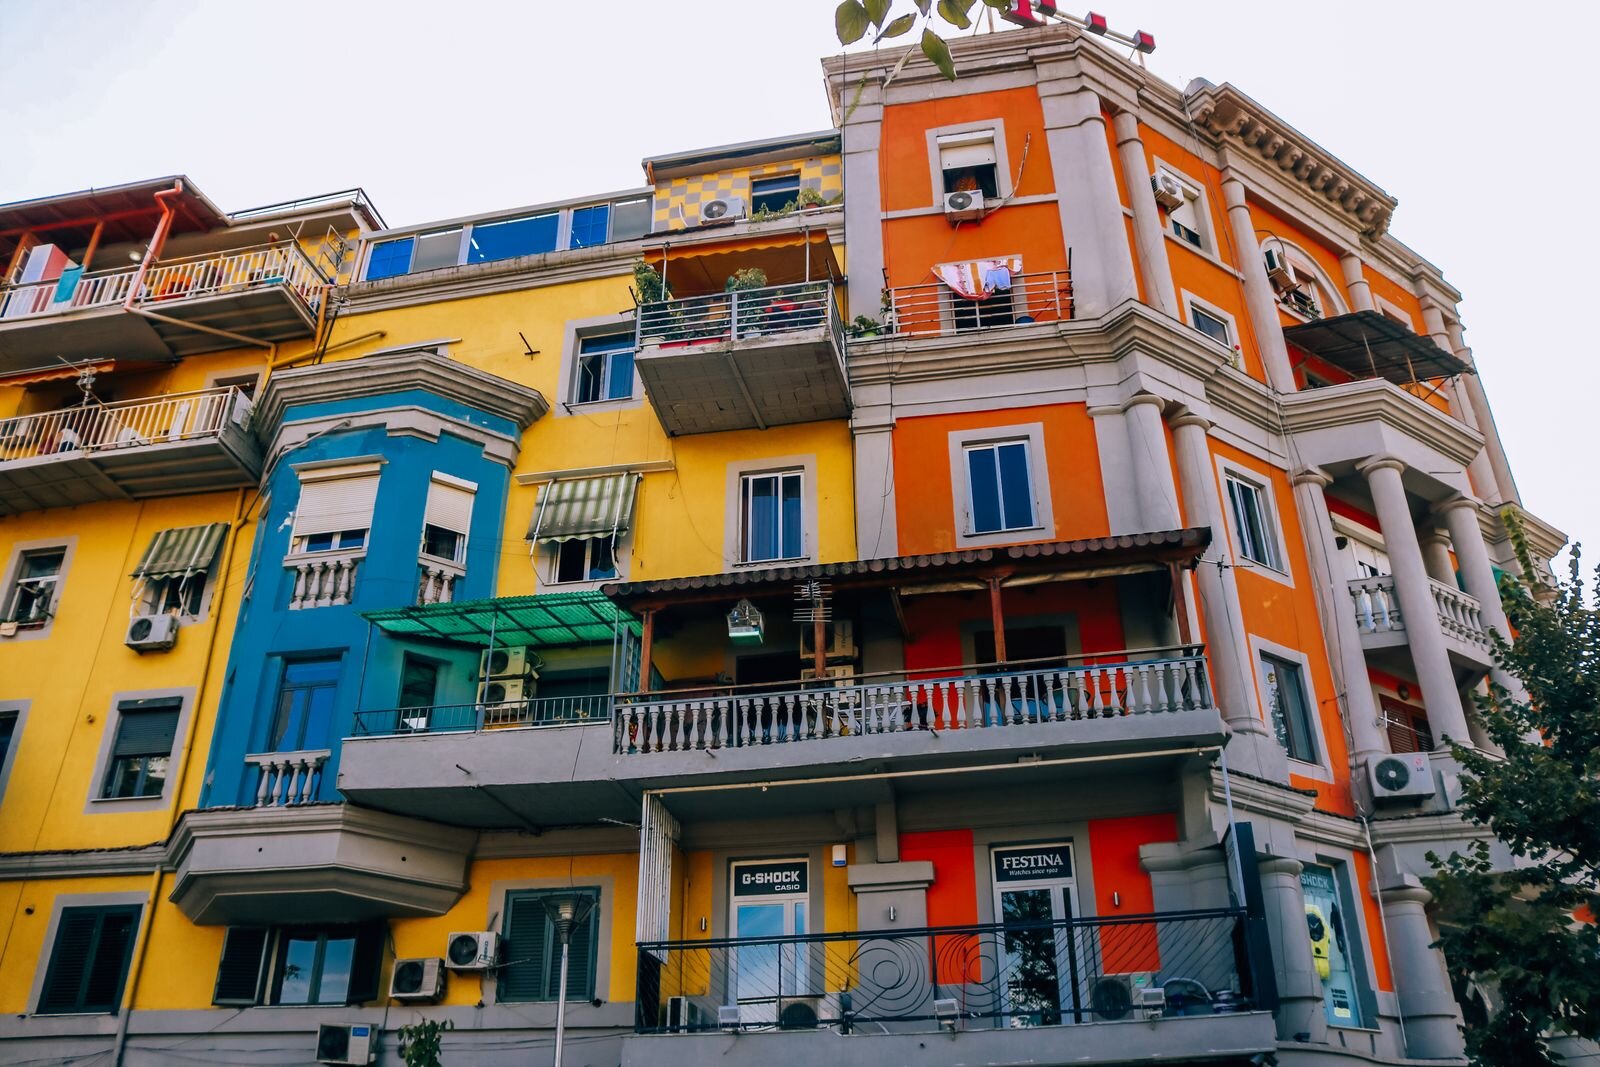 colourful painted buildings in Tirana, Albania. Yellow, blue and orange with grey balconies and columns at each window